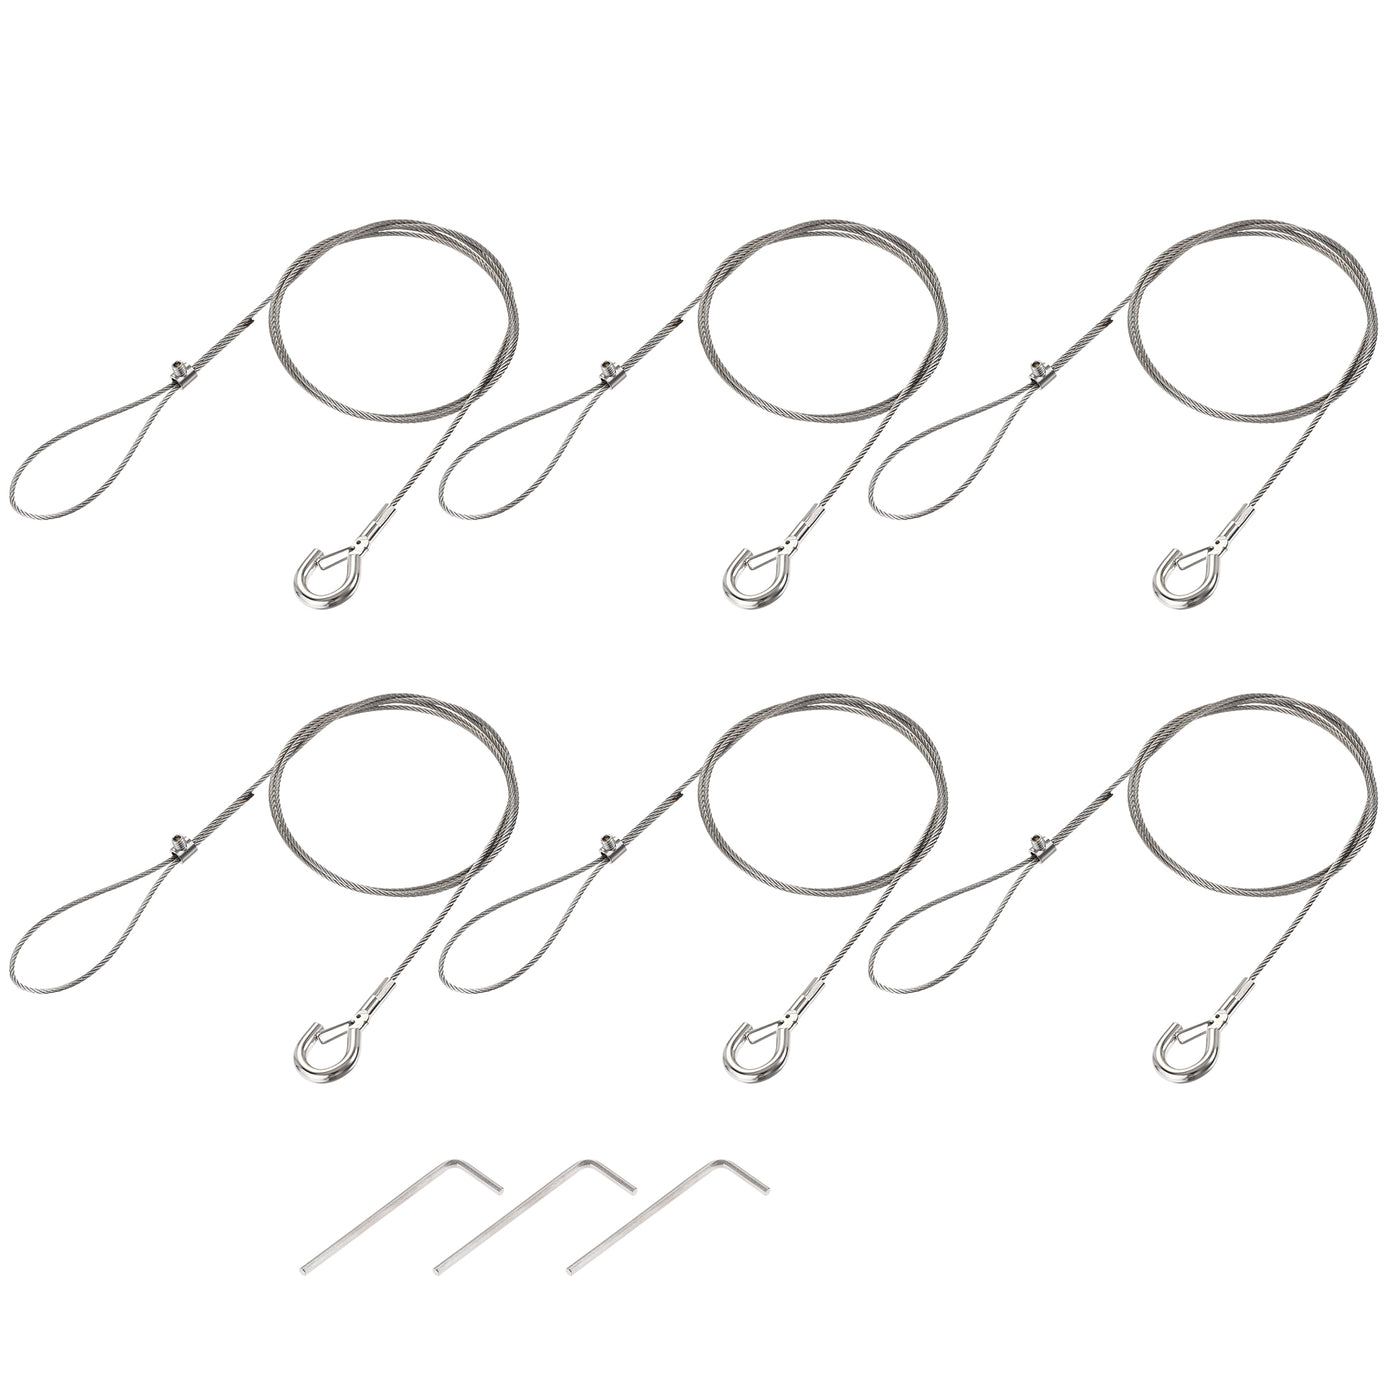 uxcell Uxcell Picture Hanging Wire Kit, 6Set 1M Adjustable Hanger Wire Hook for Home Art Gallery Picture Kit, Load 66 lbs, with Fixing Screws and Wrench